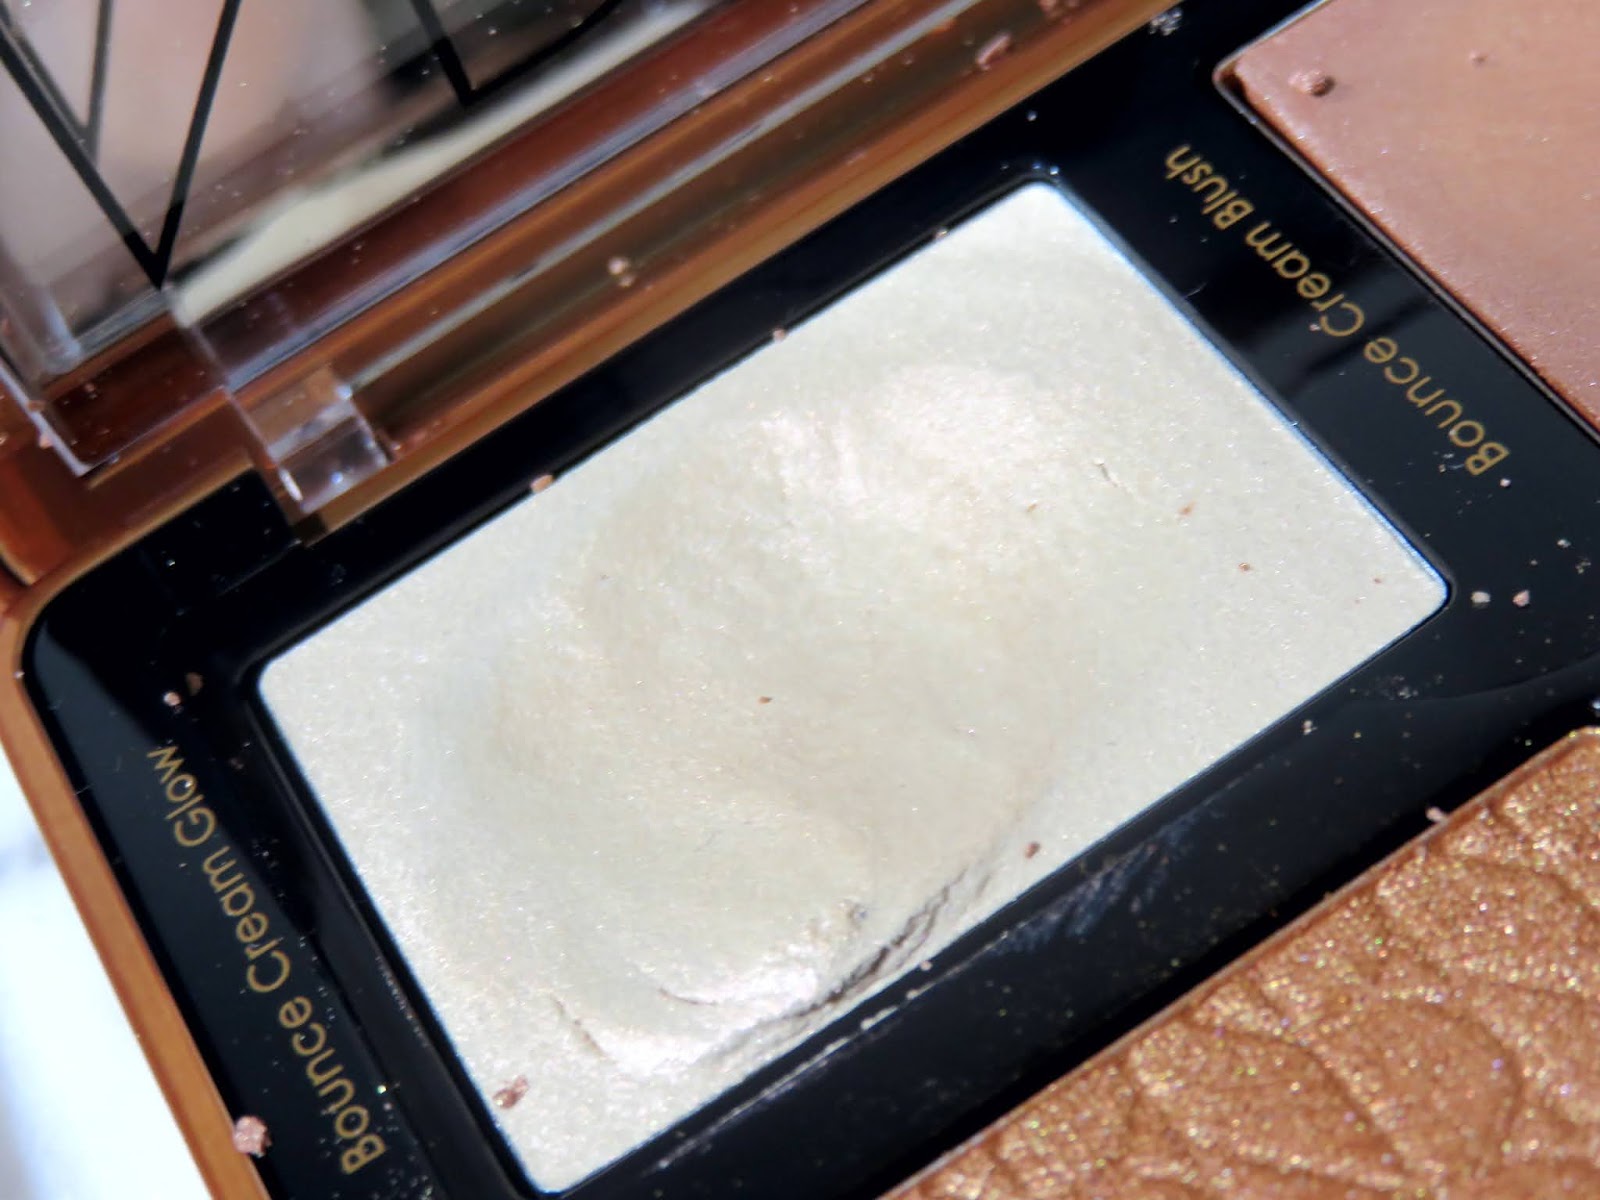 Natasha Denona Bronze Face Glow Palette Review and Swatches